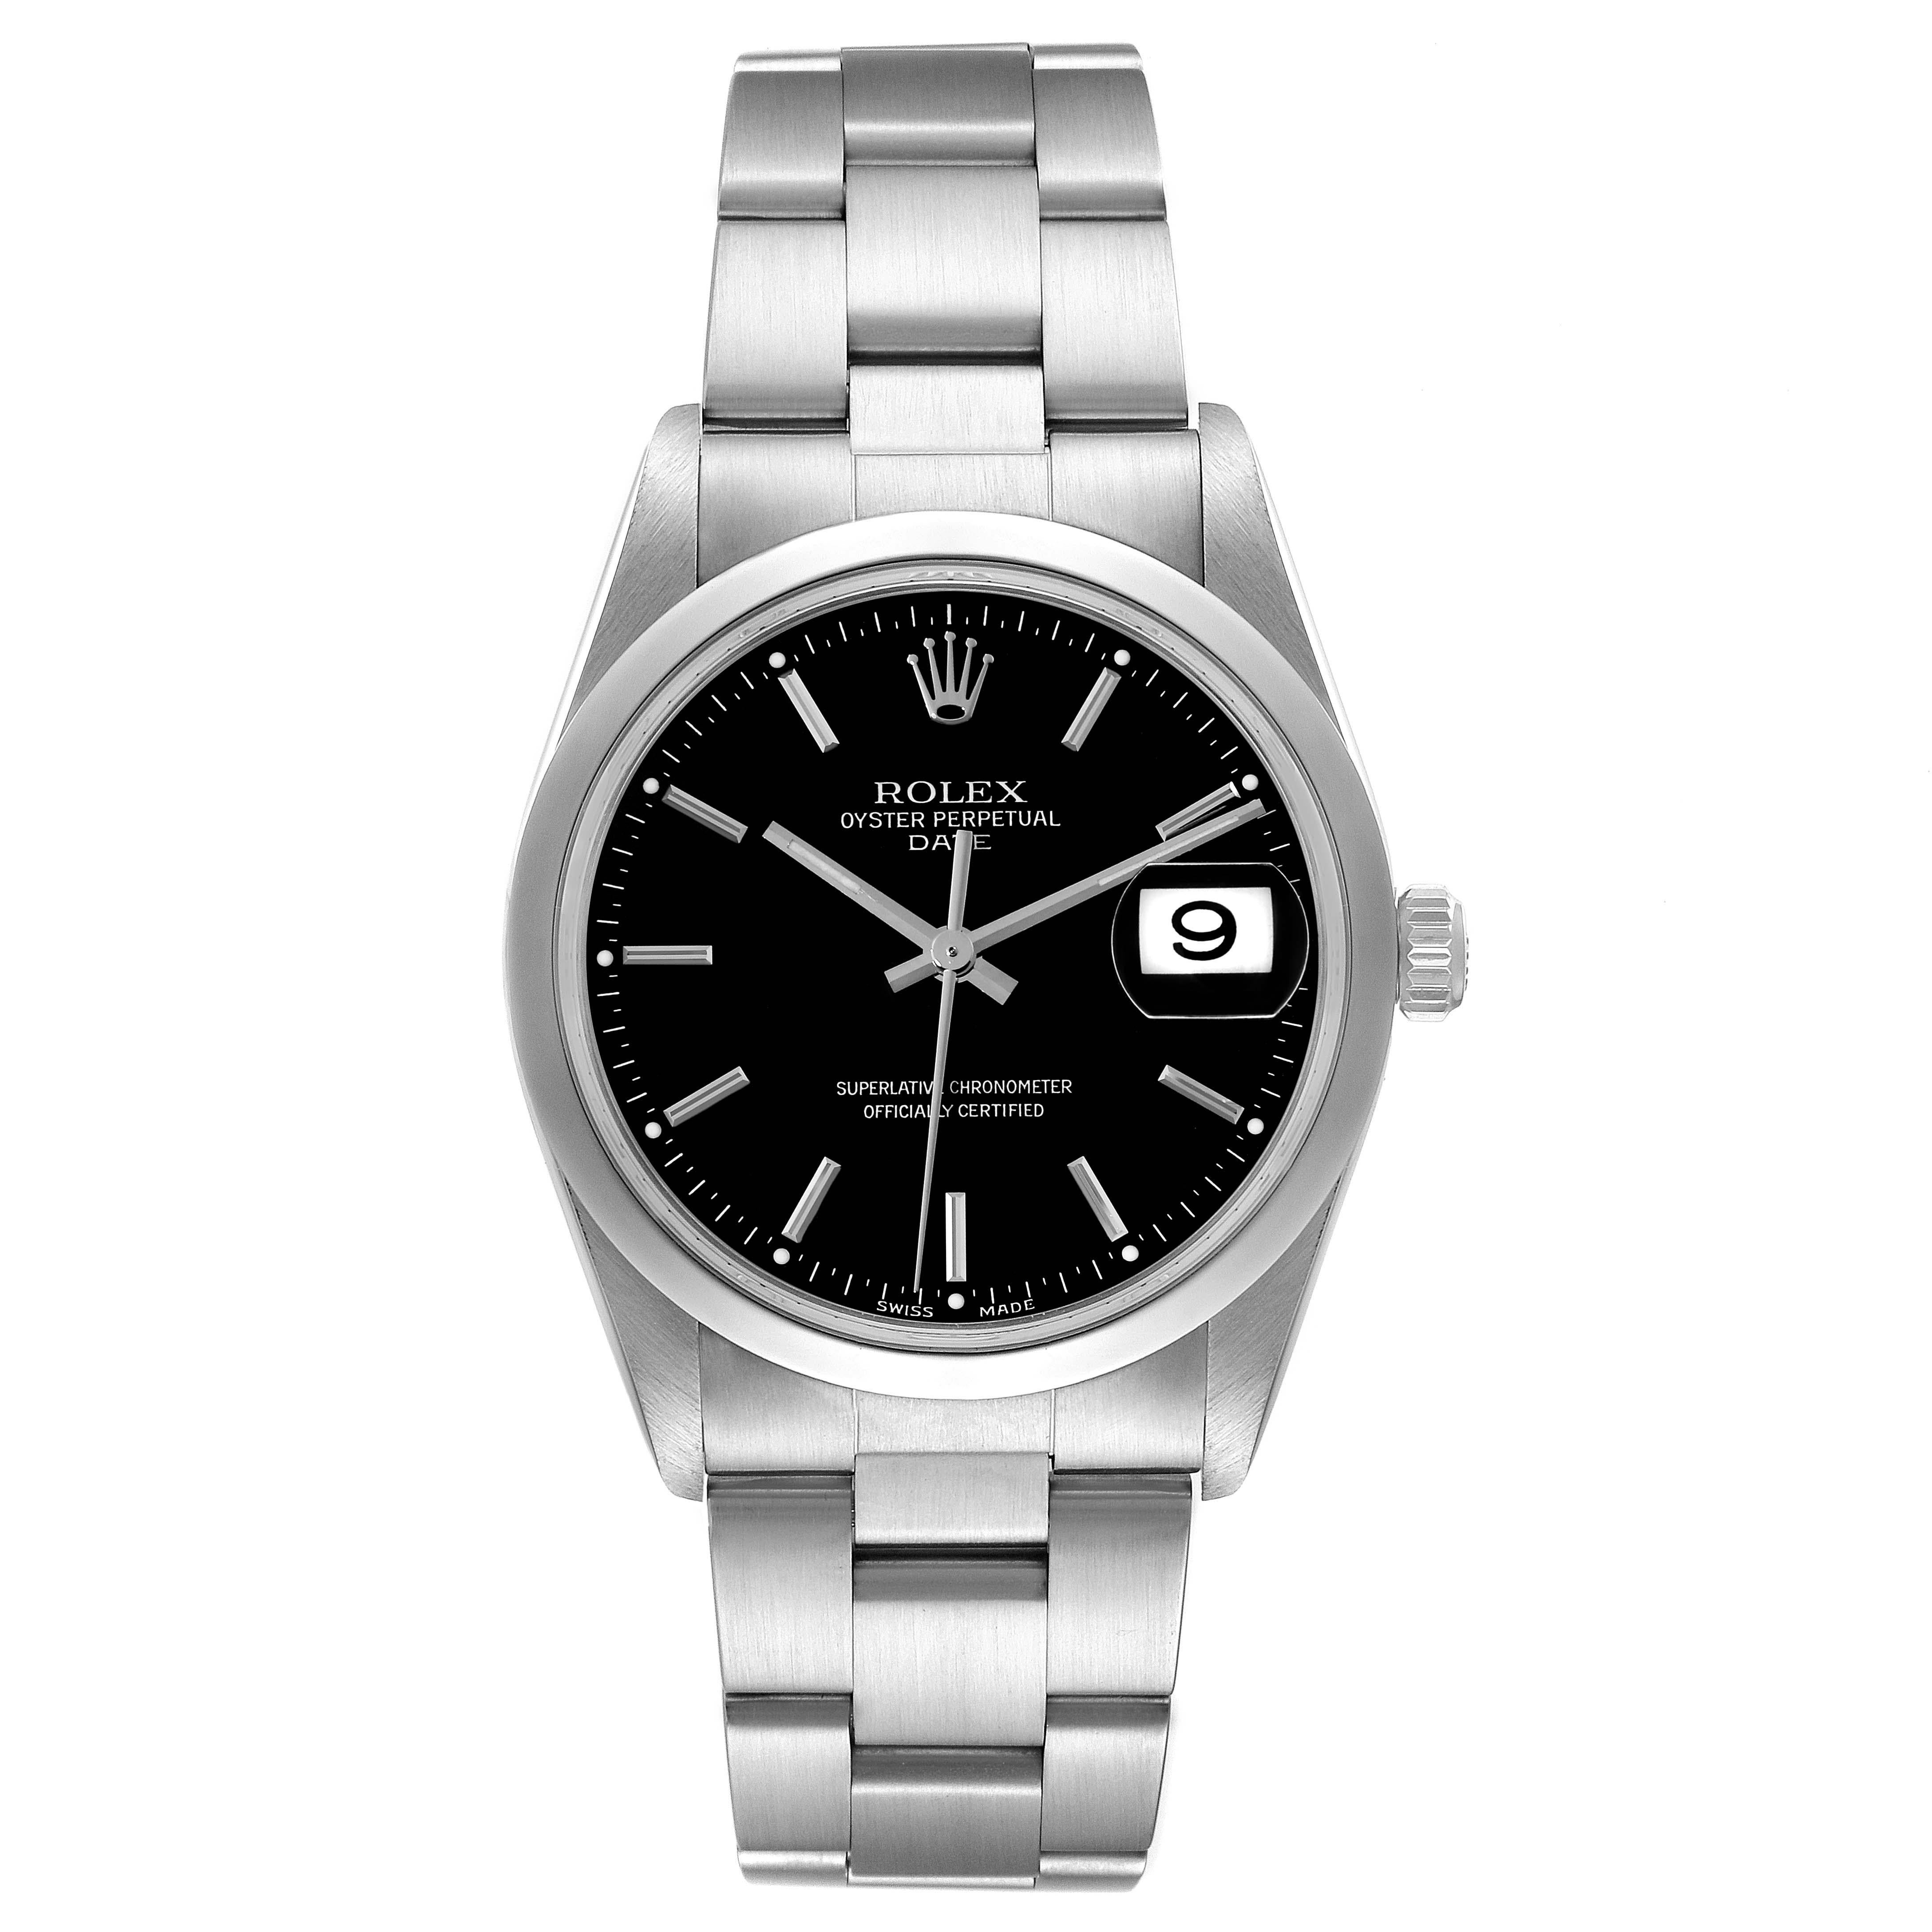 Rolex Date Black Dial Oyster Bracelet Steel Mens Watch 15200 Box Papers. Officially certified chronometer automatic self-winding movement. Stainless steel oyster case 34.0 mm in diameter. Rolex logo on the crown. Stainless steel smooth domed bezel.